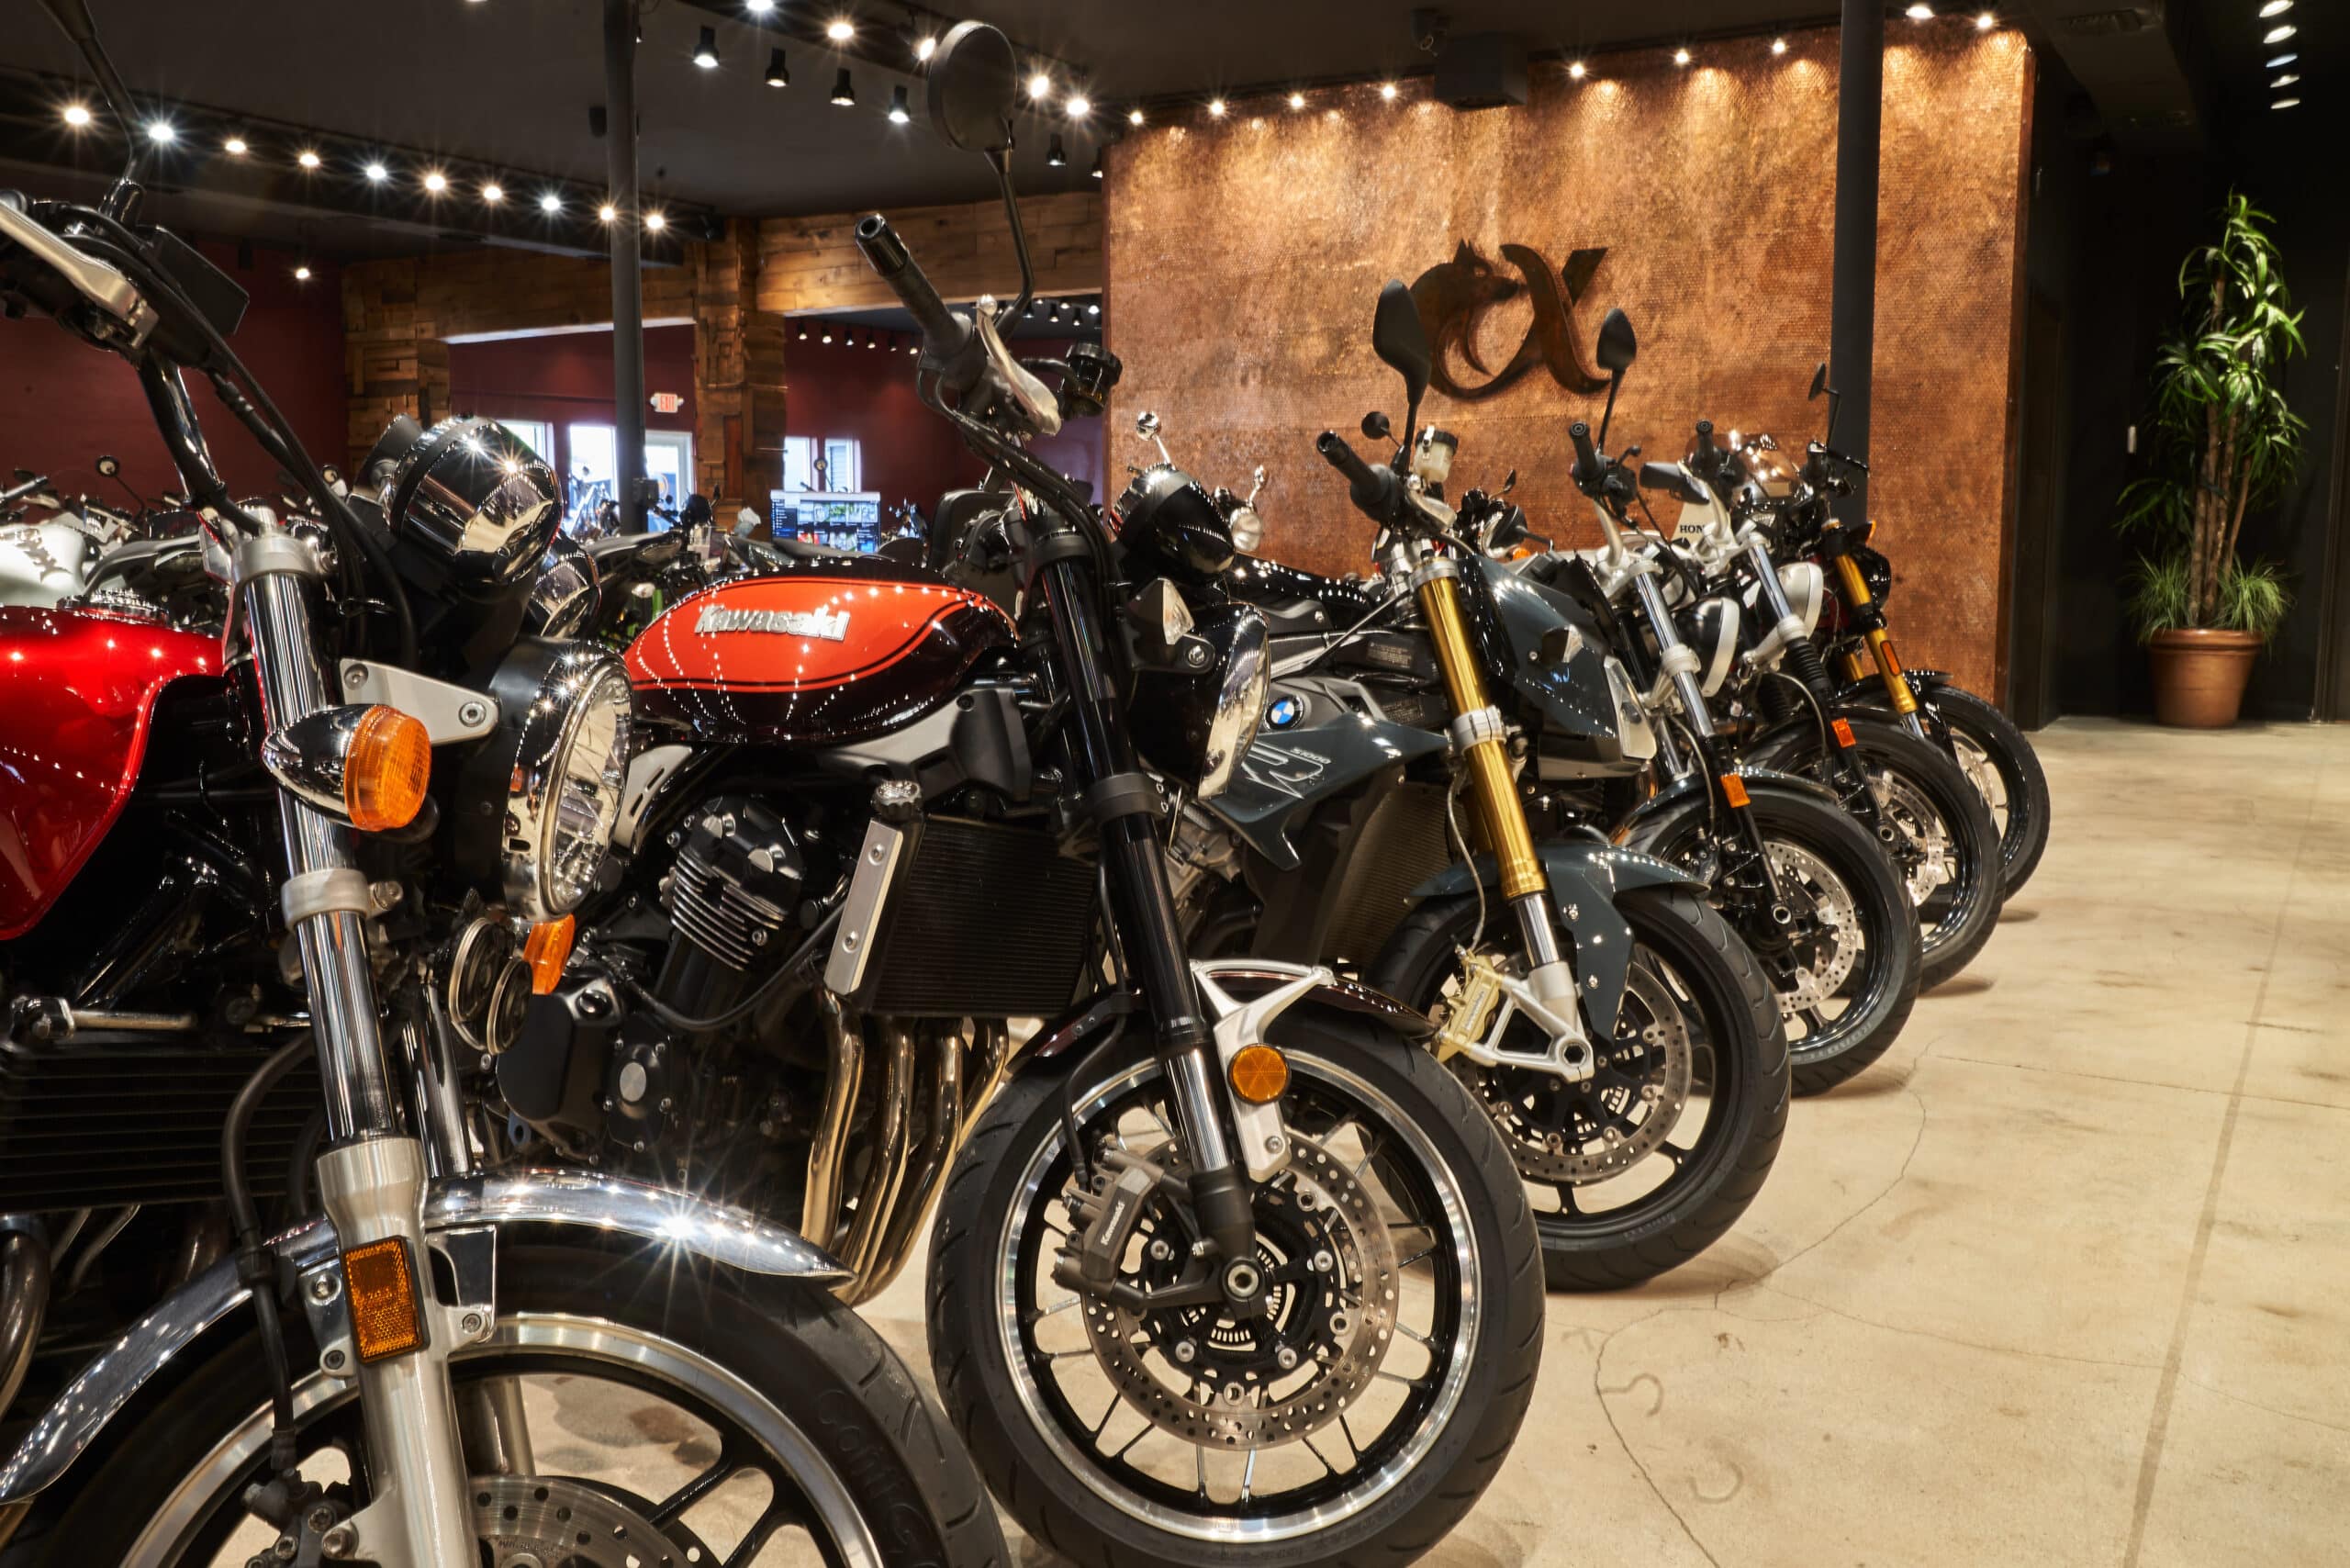 alpha cycles show room with rows of bikes for motorcycle financing